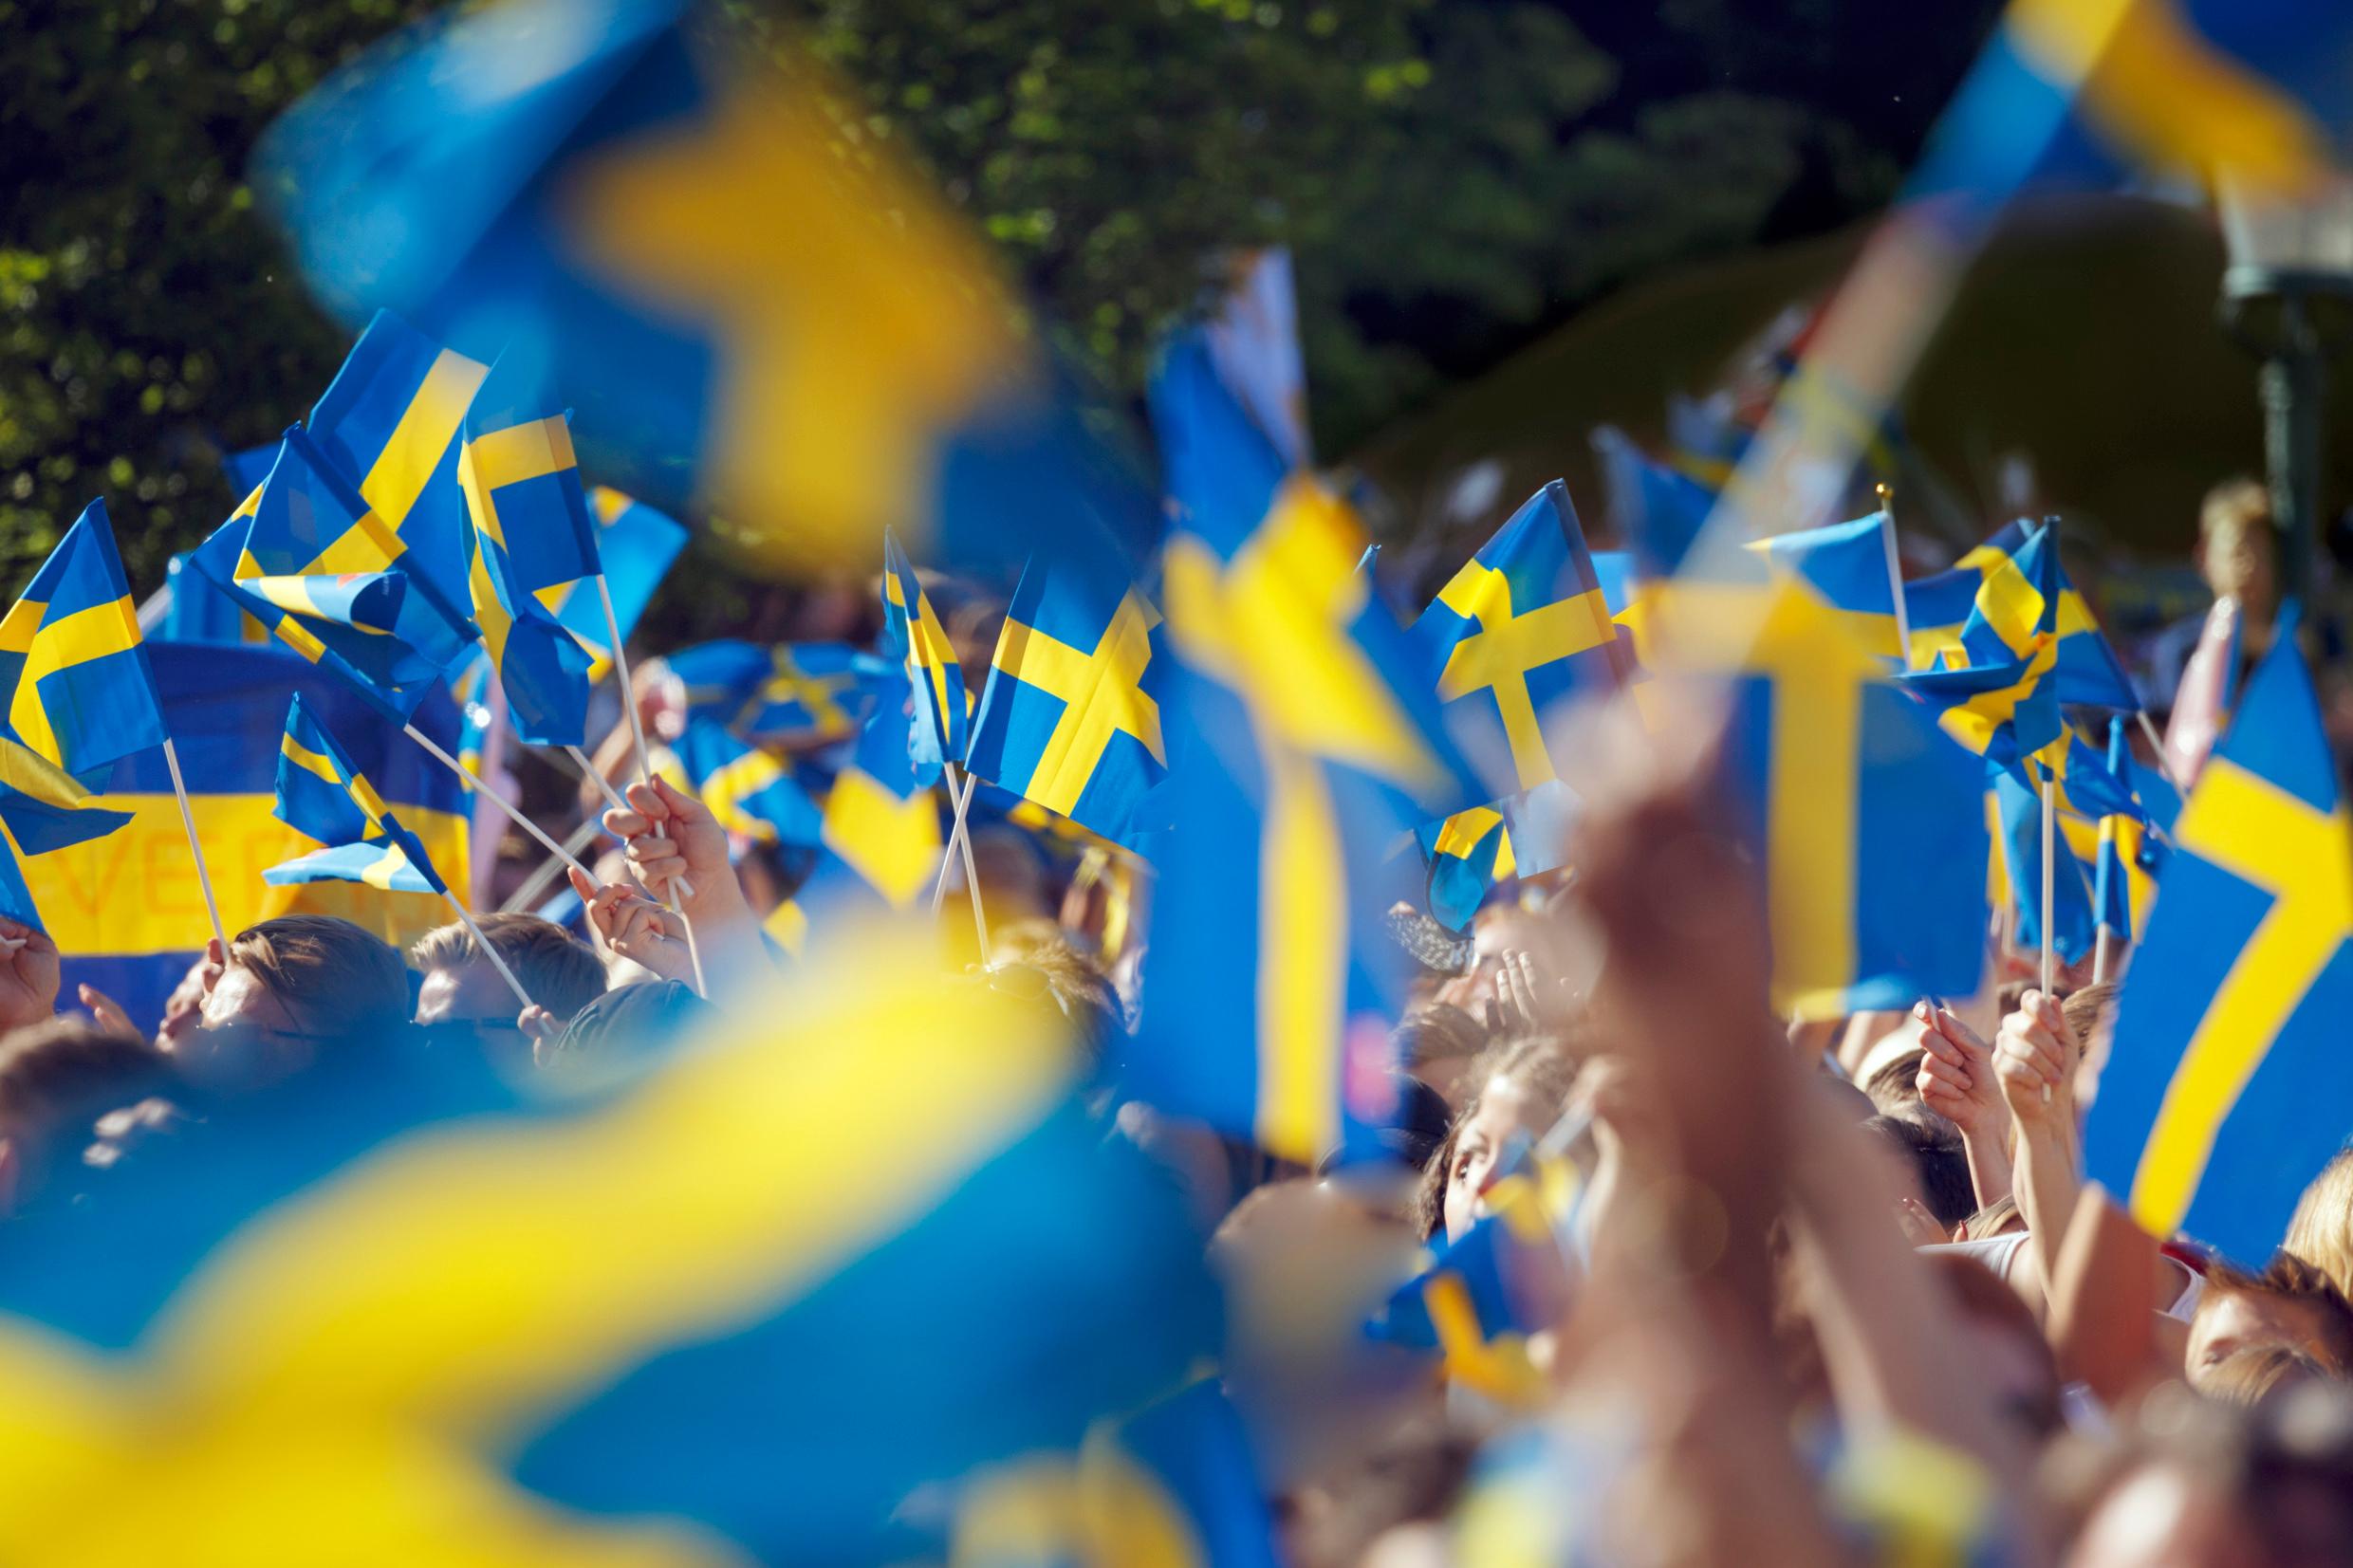 A big crowd waving numerous small Swedish flags in the air.